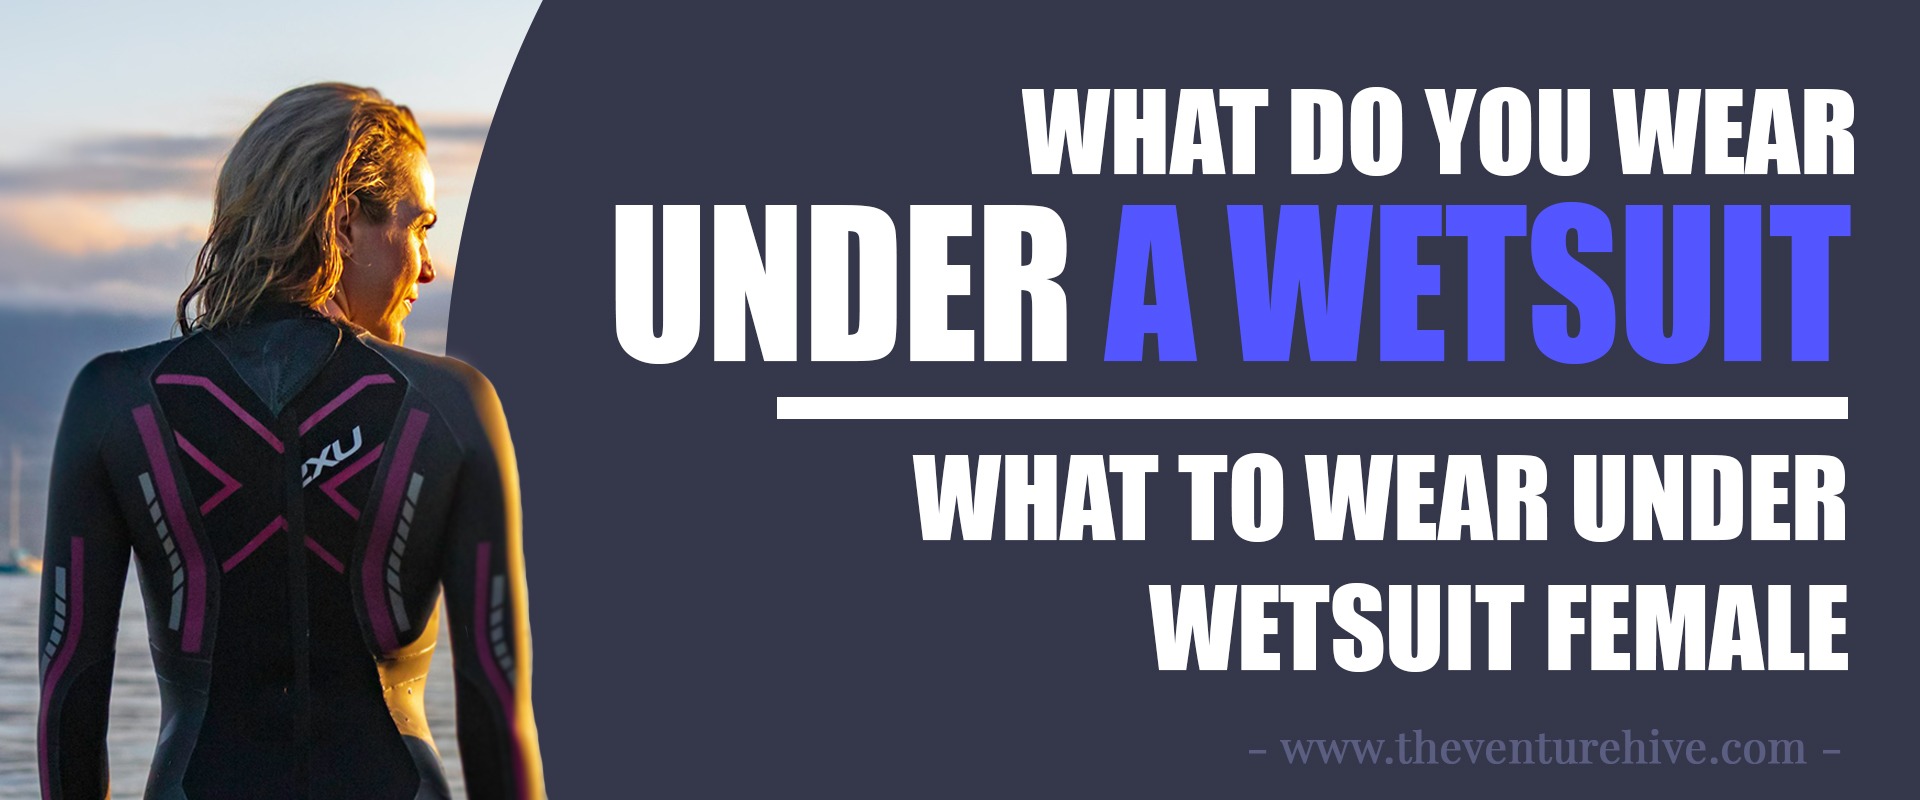 What to wear under wetsuit female